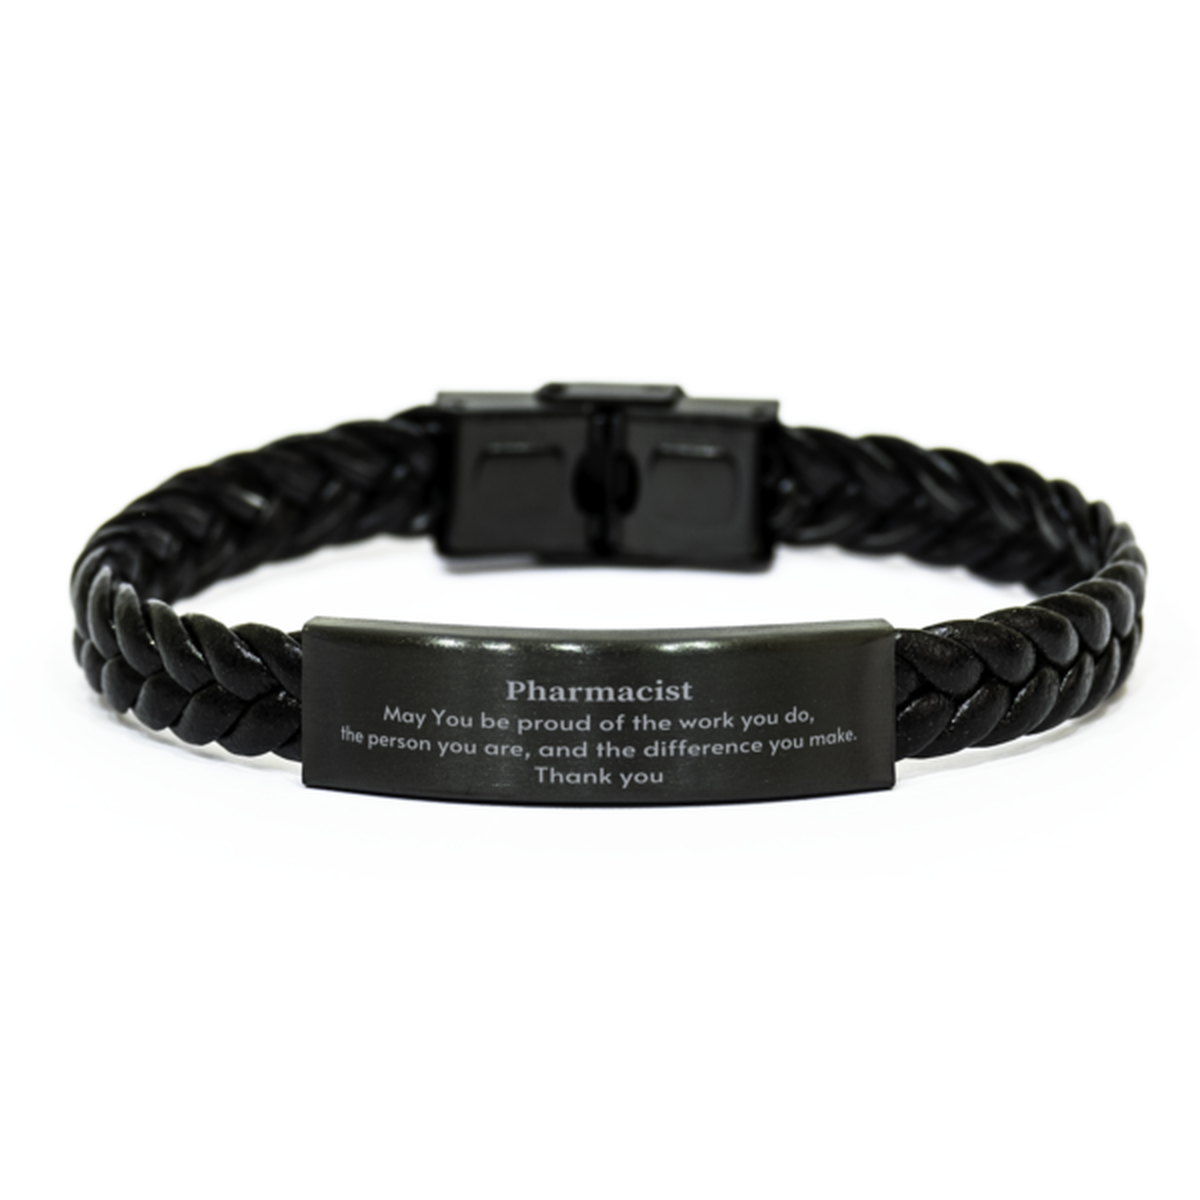 Heartwarming Braided Leather Bracelet Retirement Coworkers Gifts for Pharmacist, Pharmacist May You be proud of the work you do, the person you are Gifts for Boss Men Women Friends